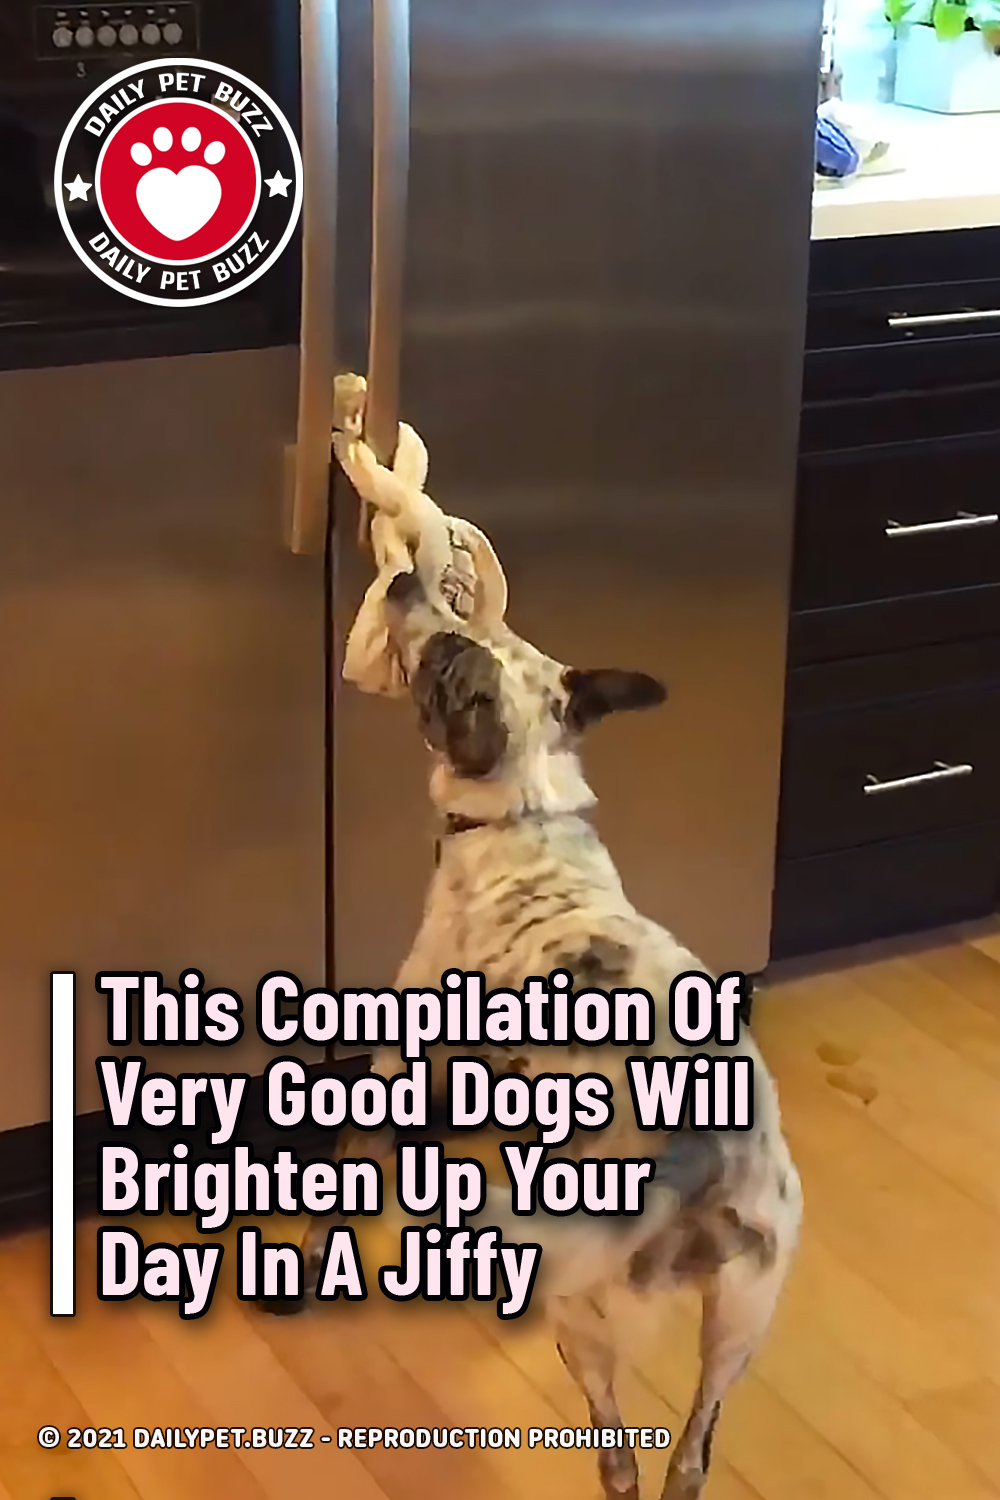 This Compilation Of Very Good Dogs Will Brighten Up Your Day In A Jiffy